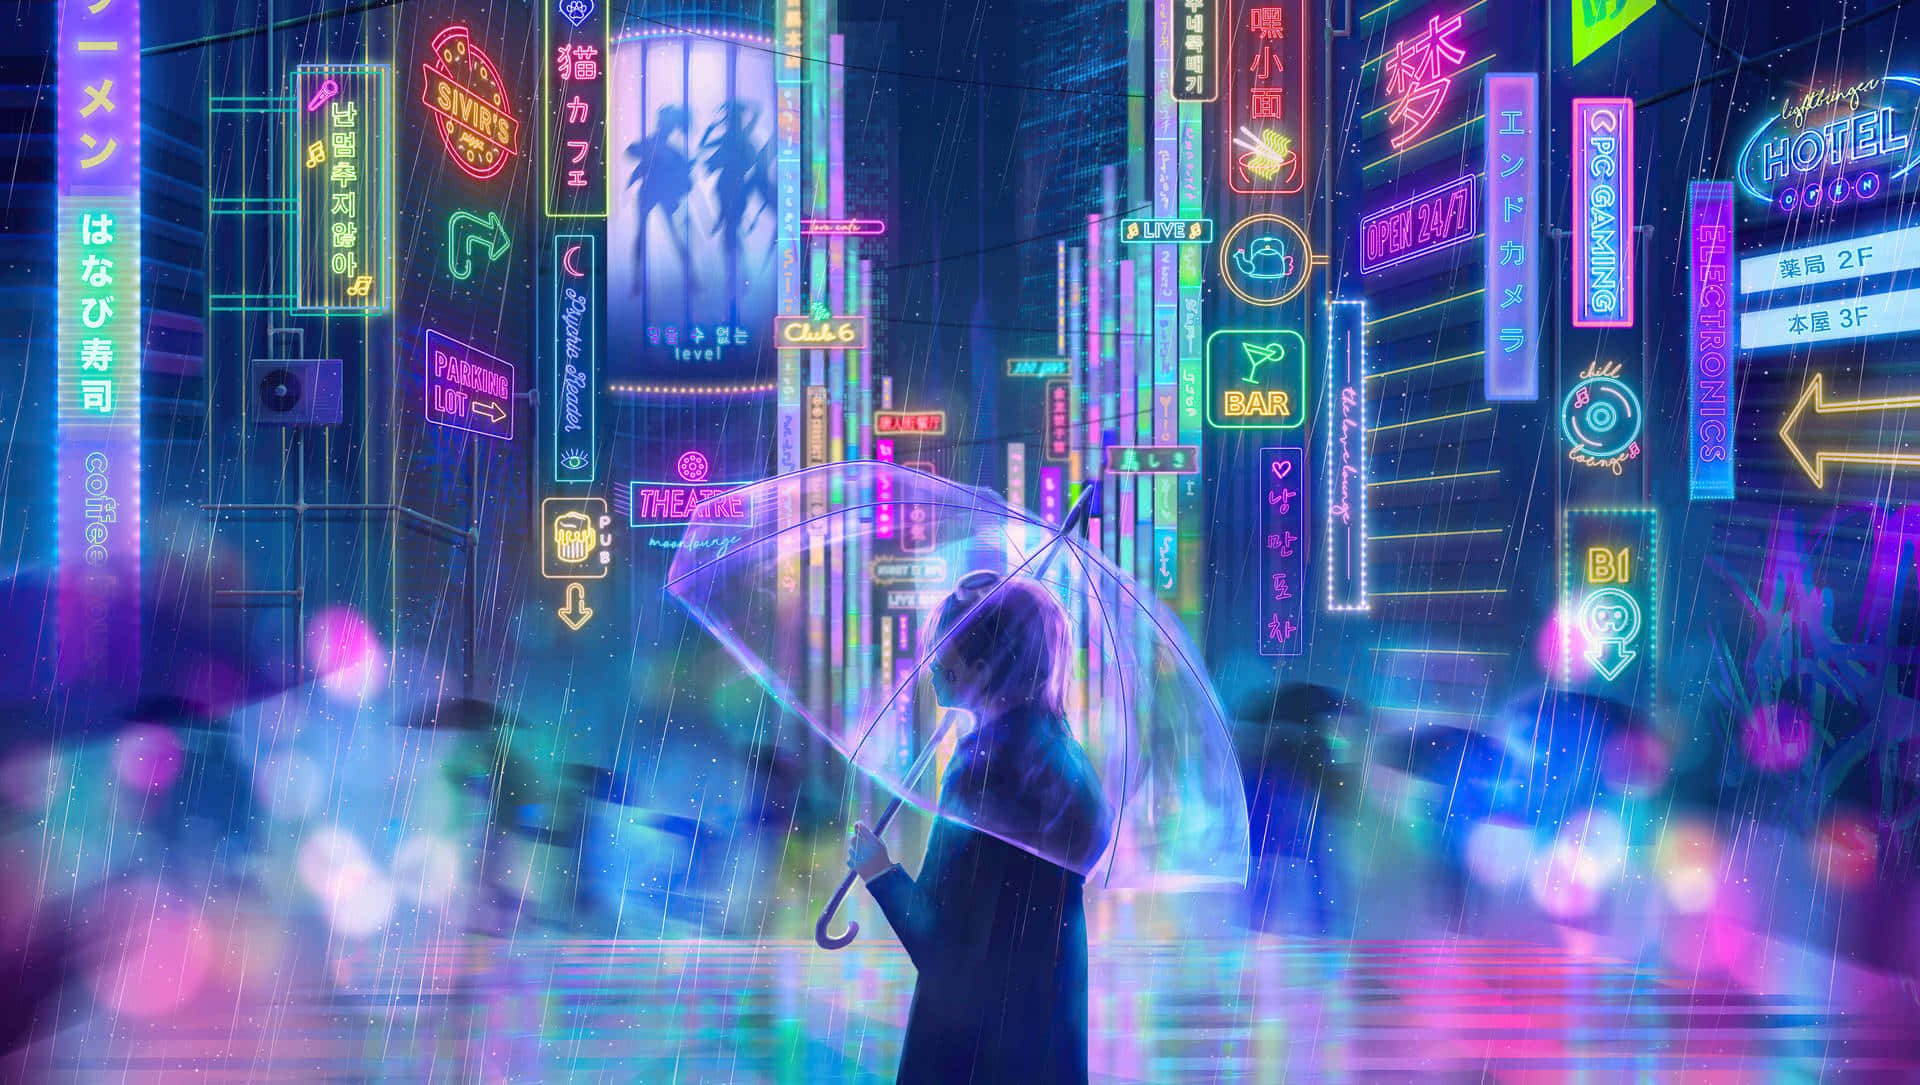 "Explore the Lights and Beauty of Neon City" Wallpaper